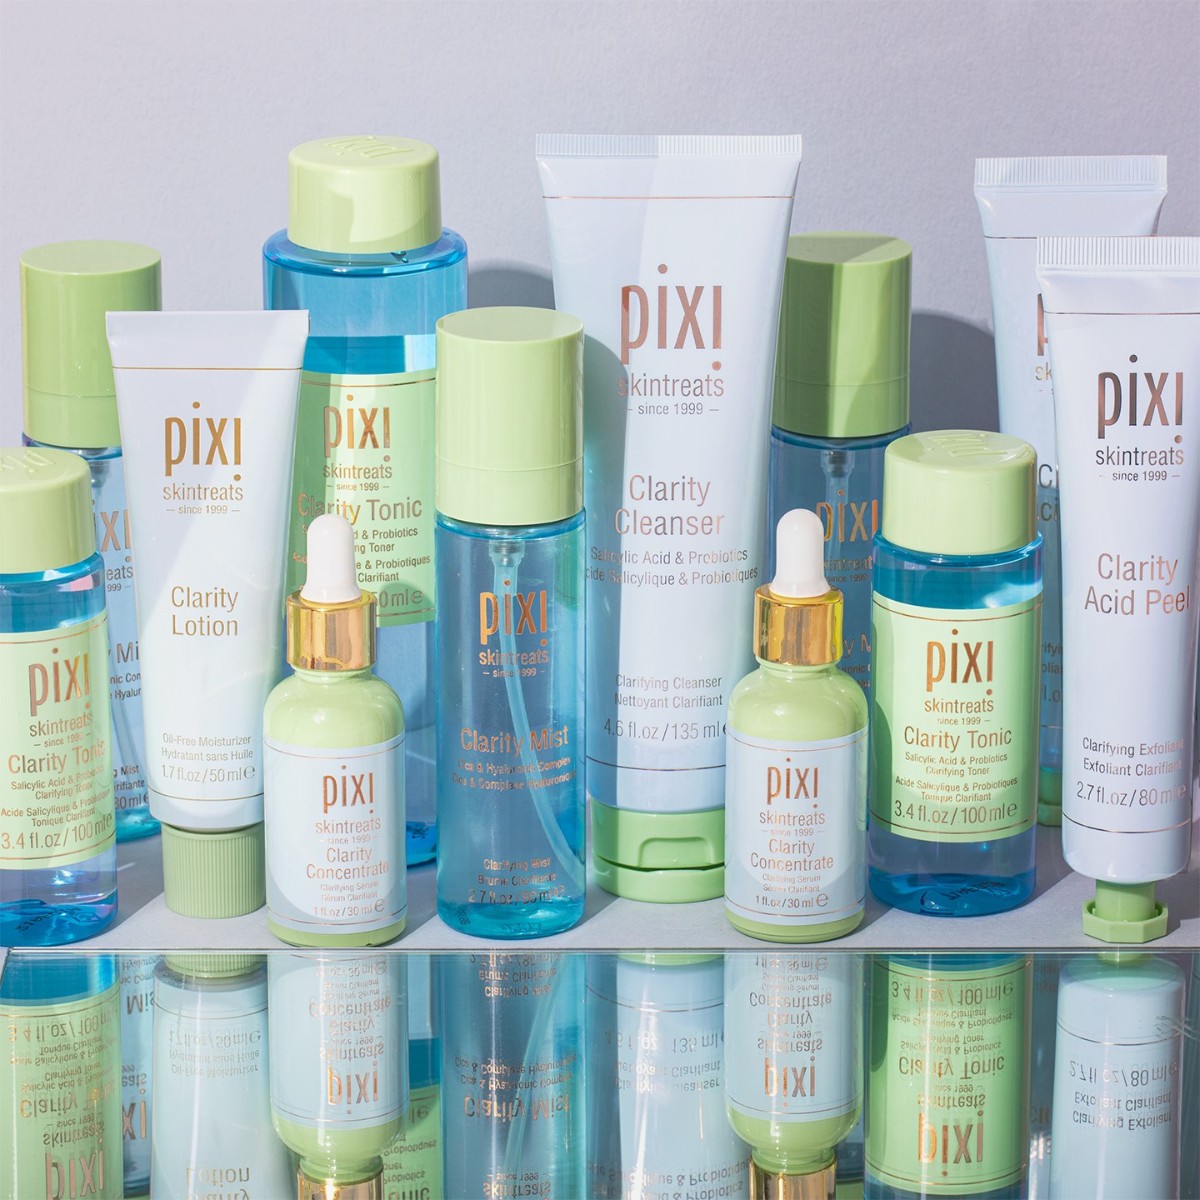 Clear as a #PixiPerfect day! Achieve bright and radiant skin-clarity with the help of Clarity Collection's gentle yet effective formulas, with ingredients like Glycolic, Lactic and Salicylic Acids! Which will you be adding to your clarifying routine? #PixiBeauty #Skintreats